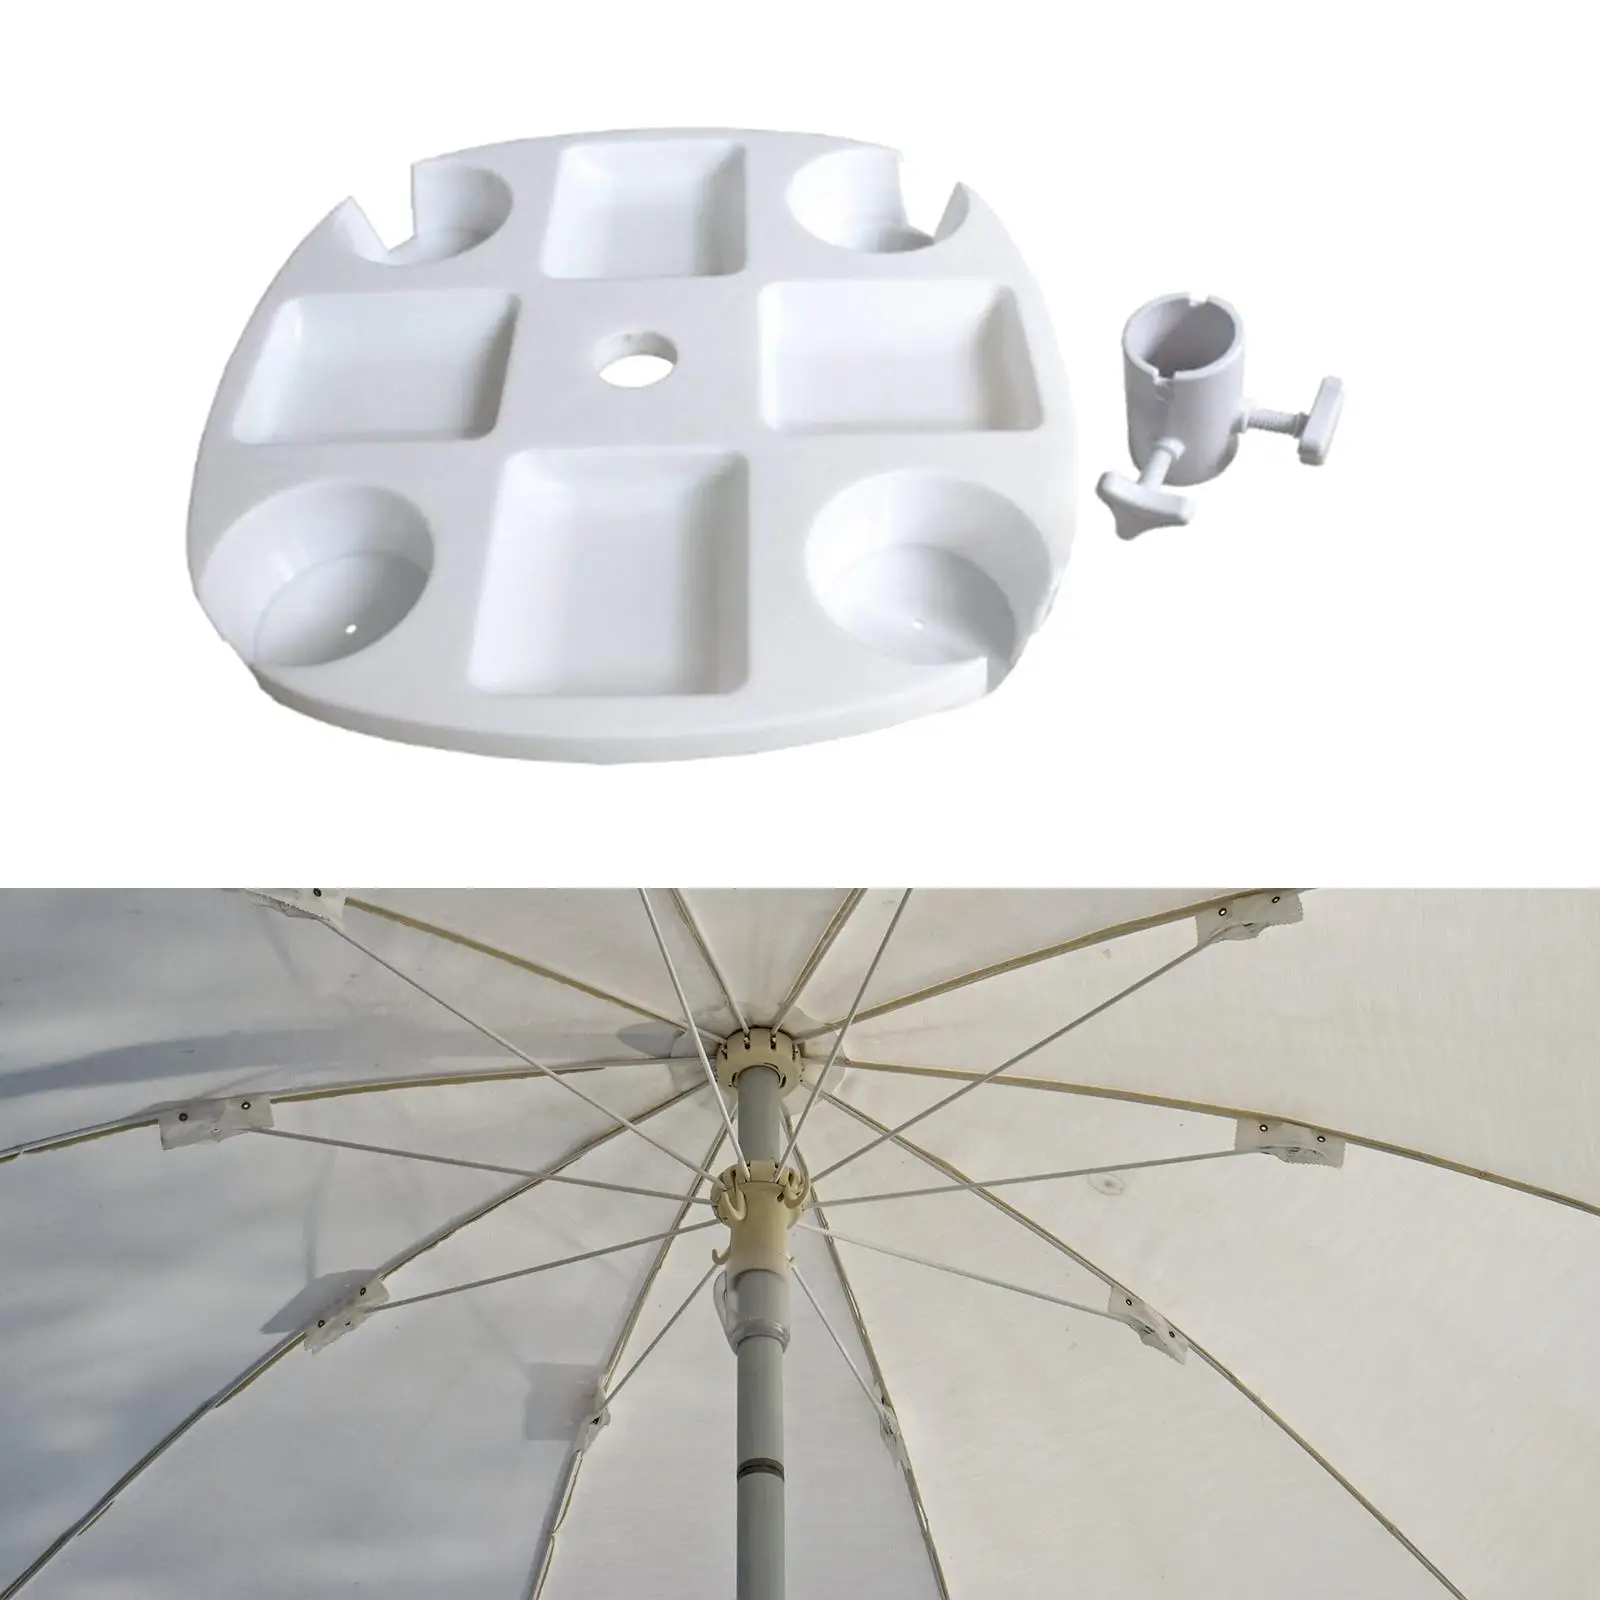 Outdoor Beach Umbrella Table Tray with 4 Cup Holders Snack Drink Holder